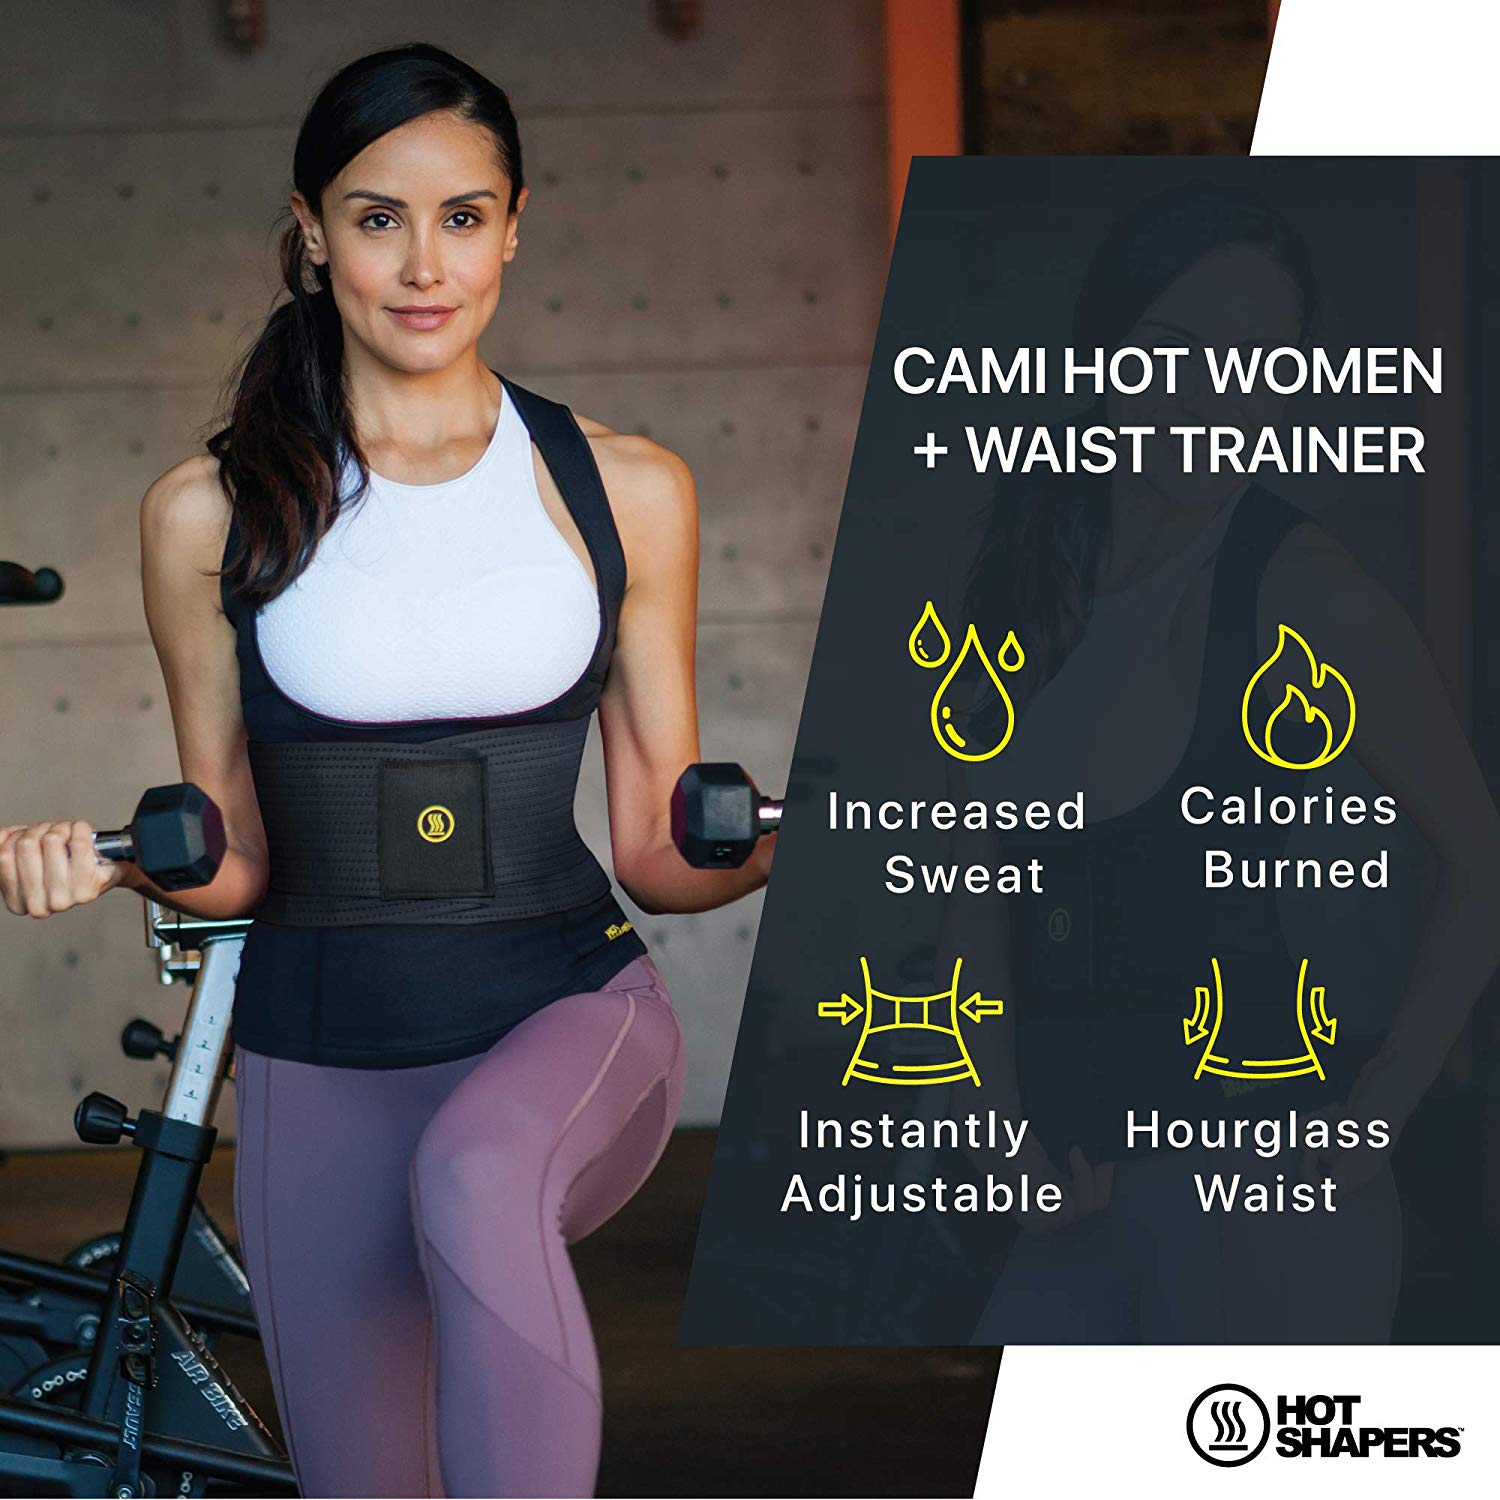 HOT SHAPERS Cami Hot with Waist Trainer